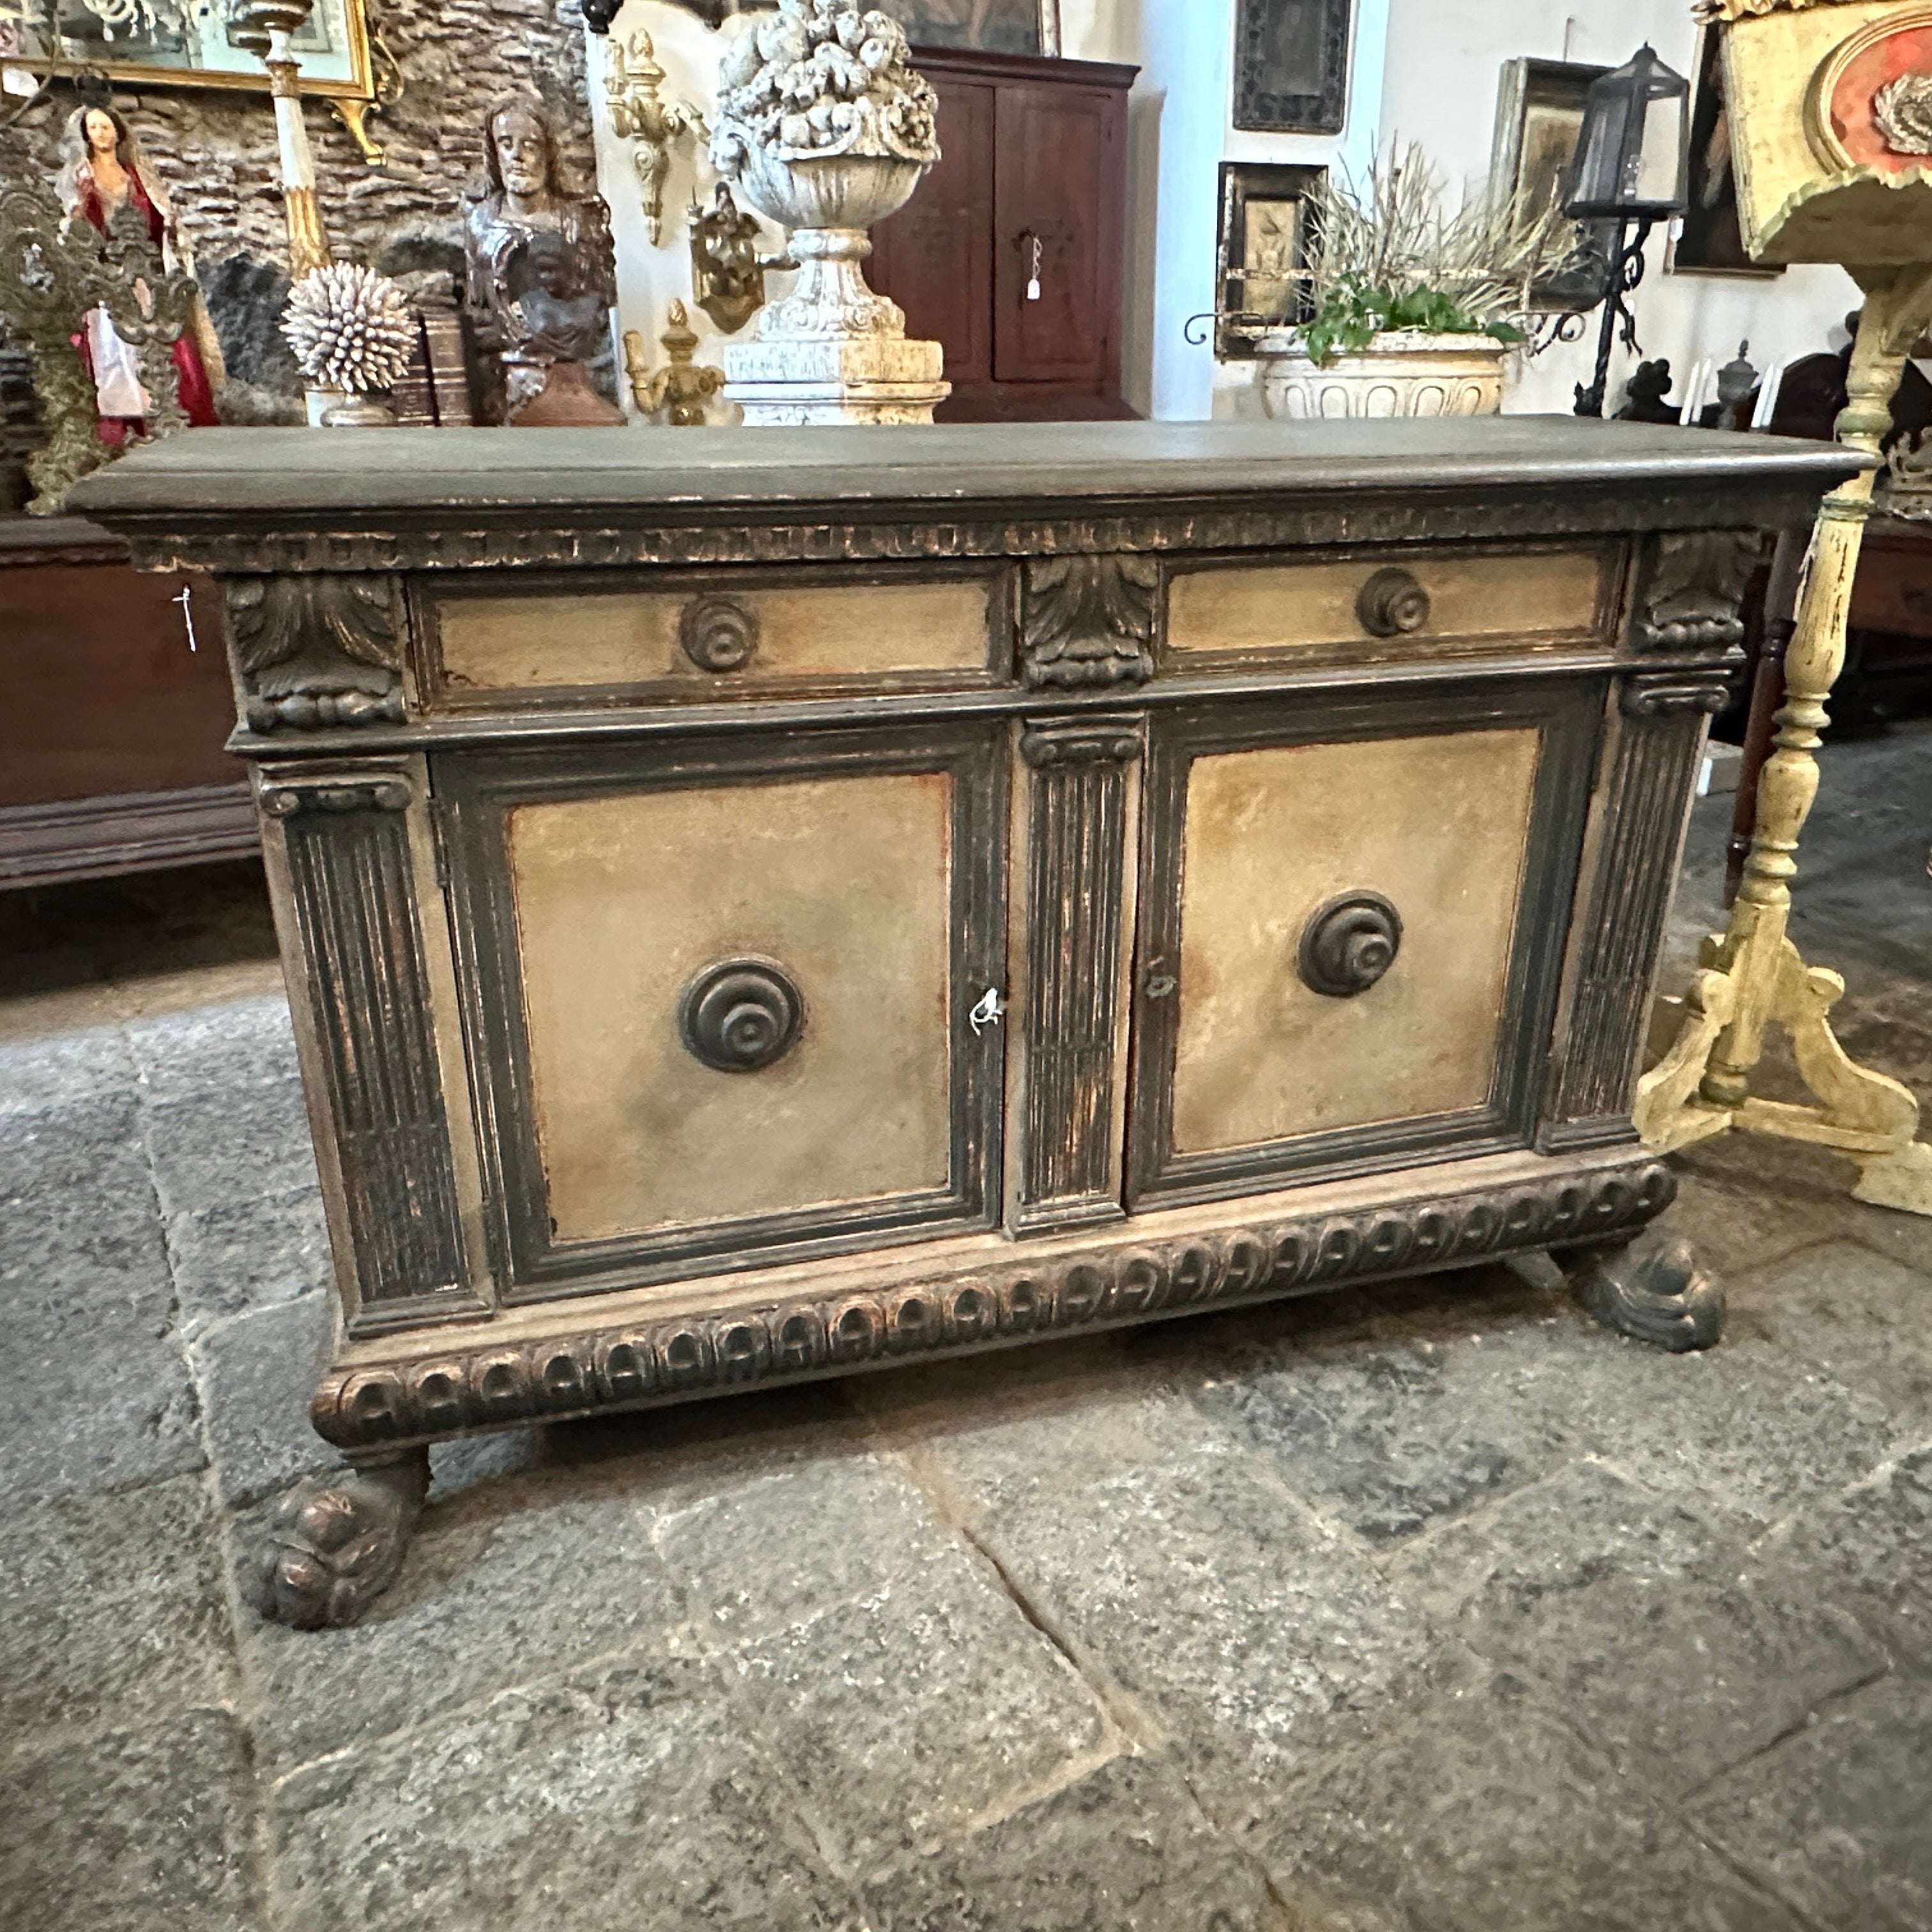 A blue and white lacquered wood low credenza hand-crafted in Sicily in the late 19th century, furniture it's in original conditions with signs due to use and age. This Sicilian Credenza is a remarkable piece of furniture that embodies the style and